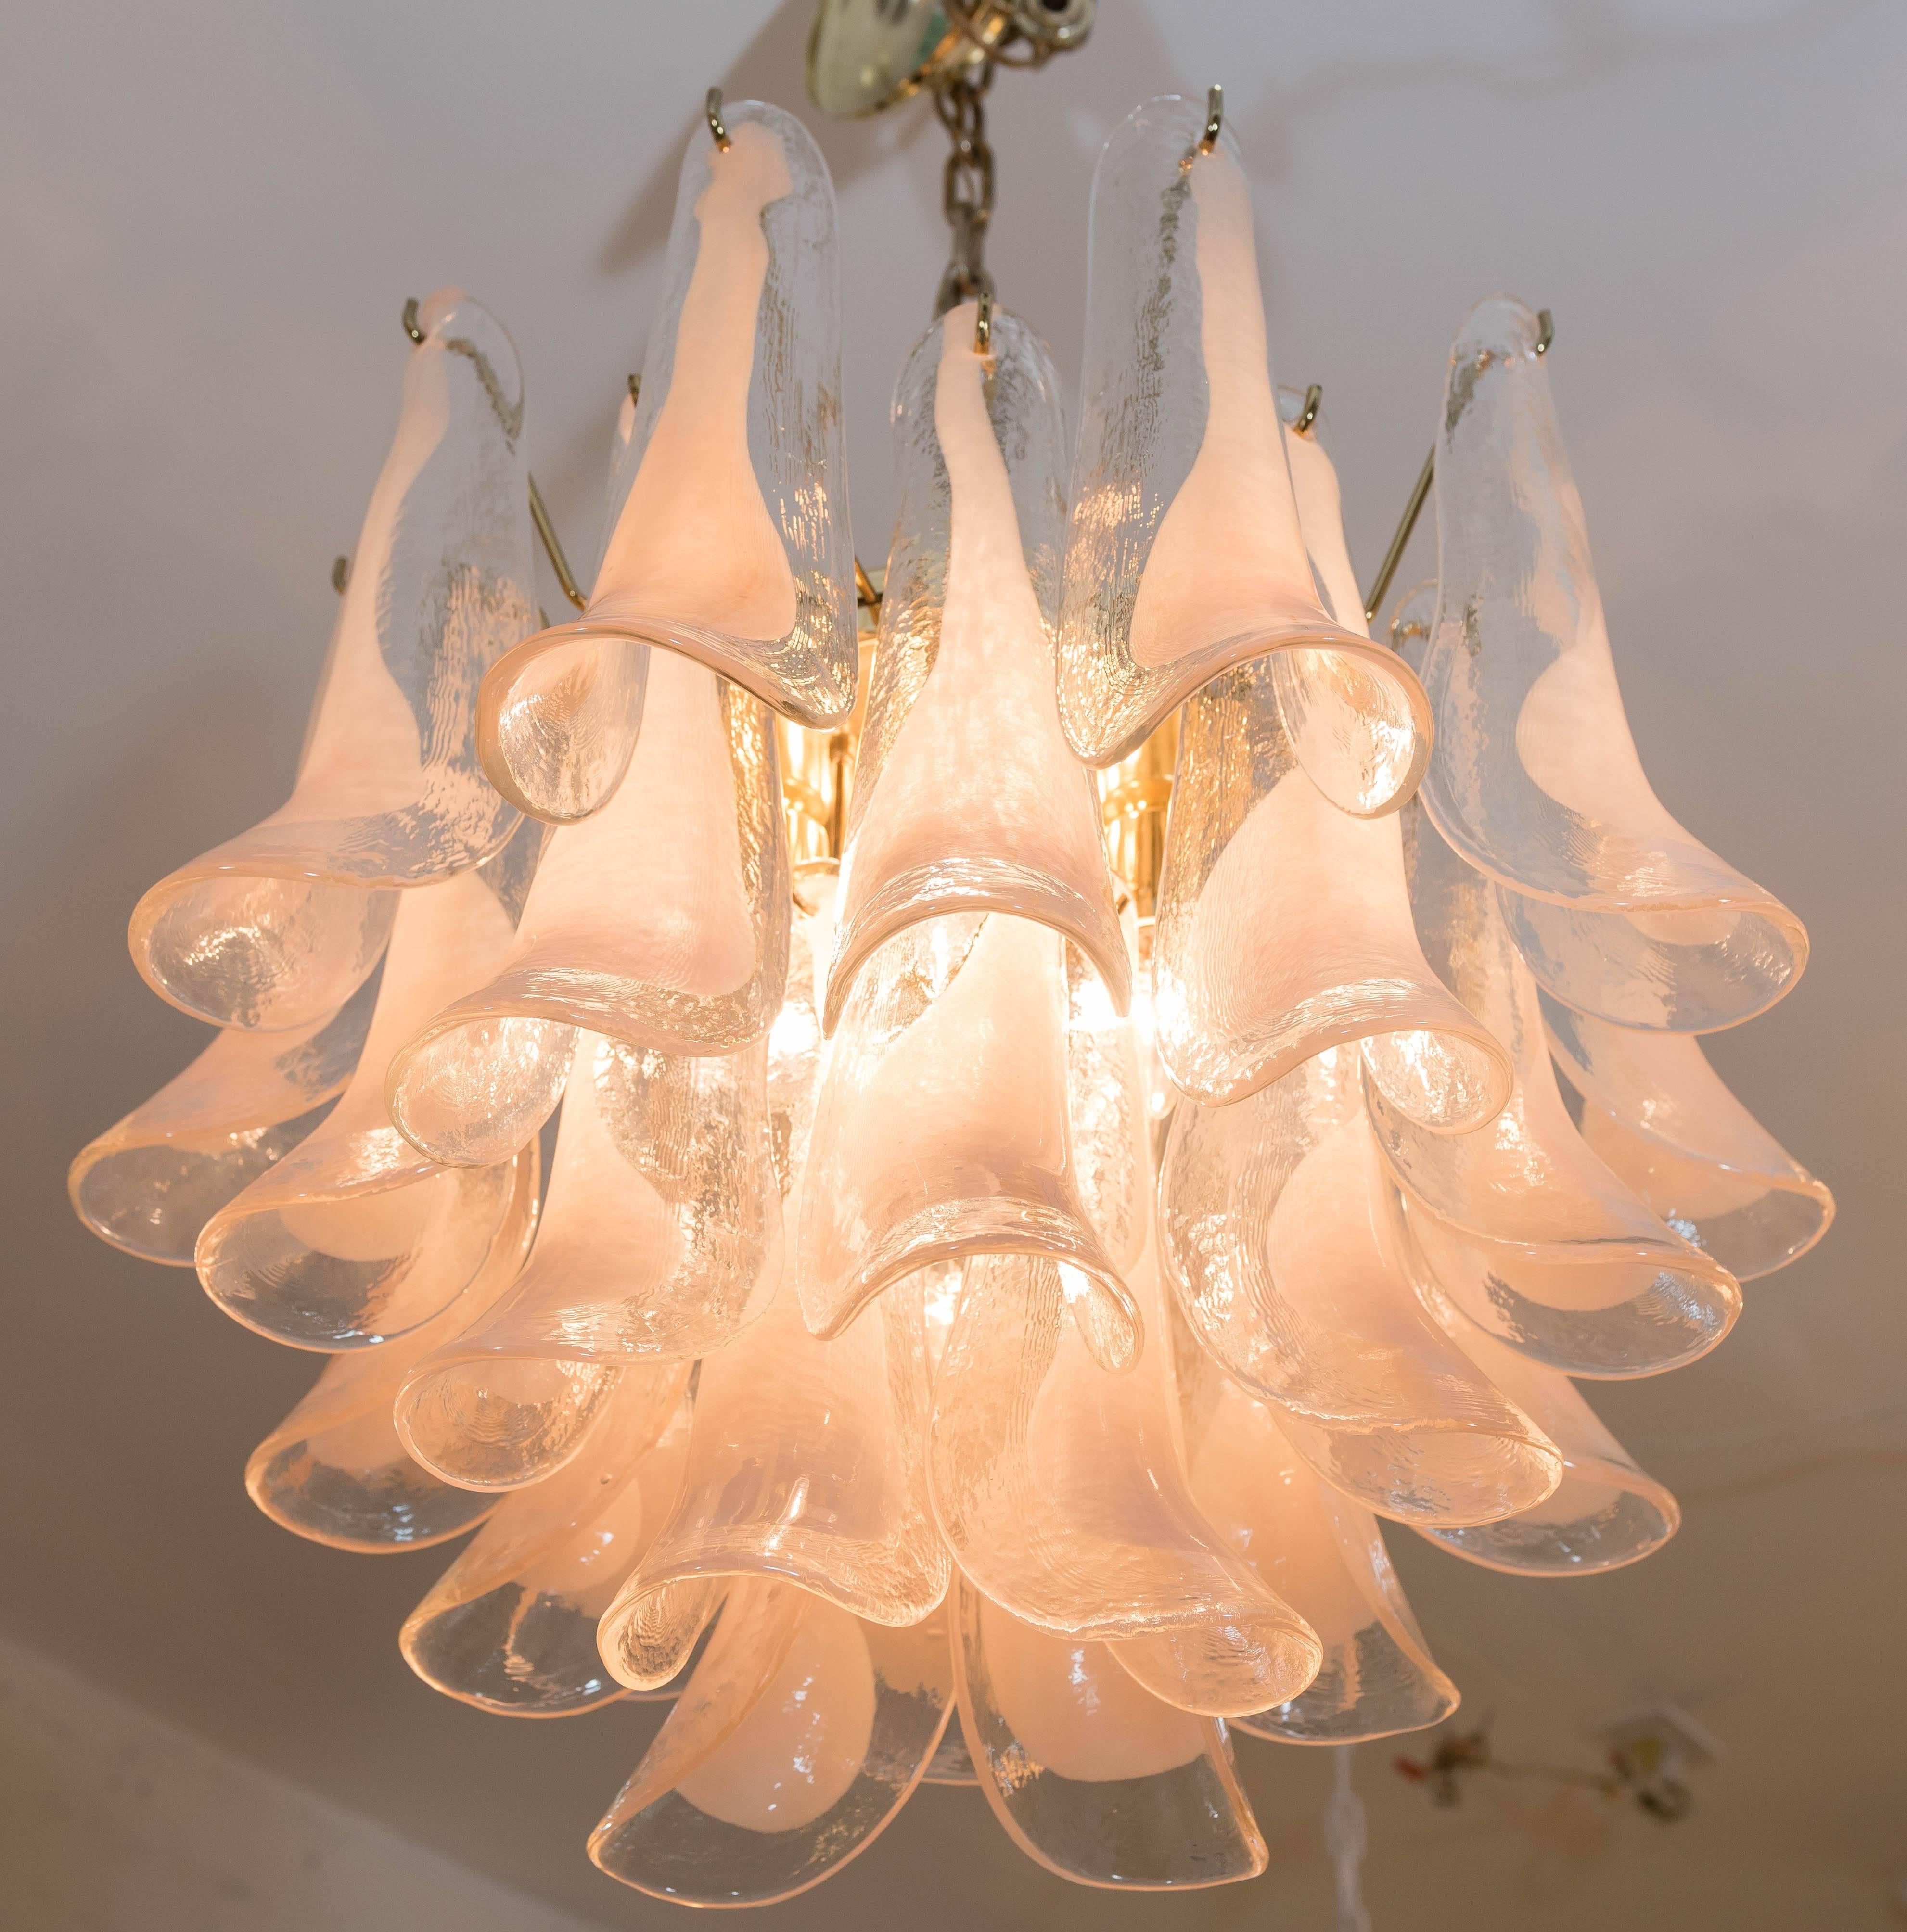 A gorgeous Murano fixture with clear glass